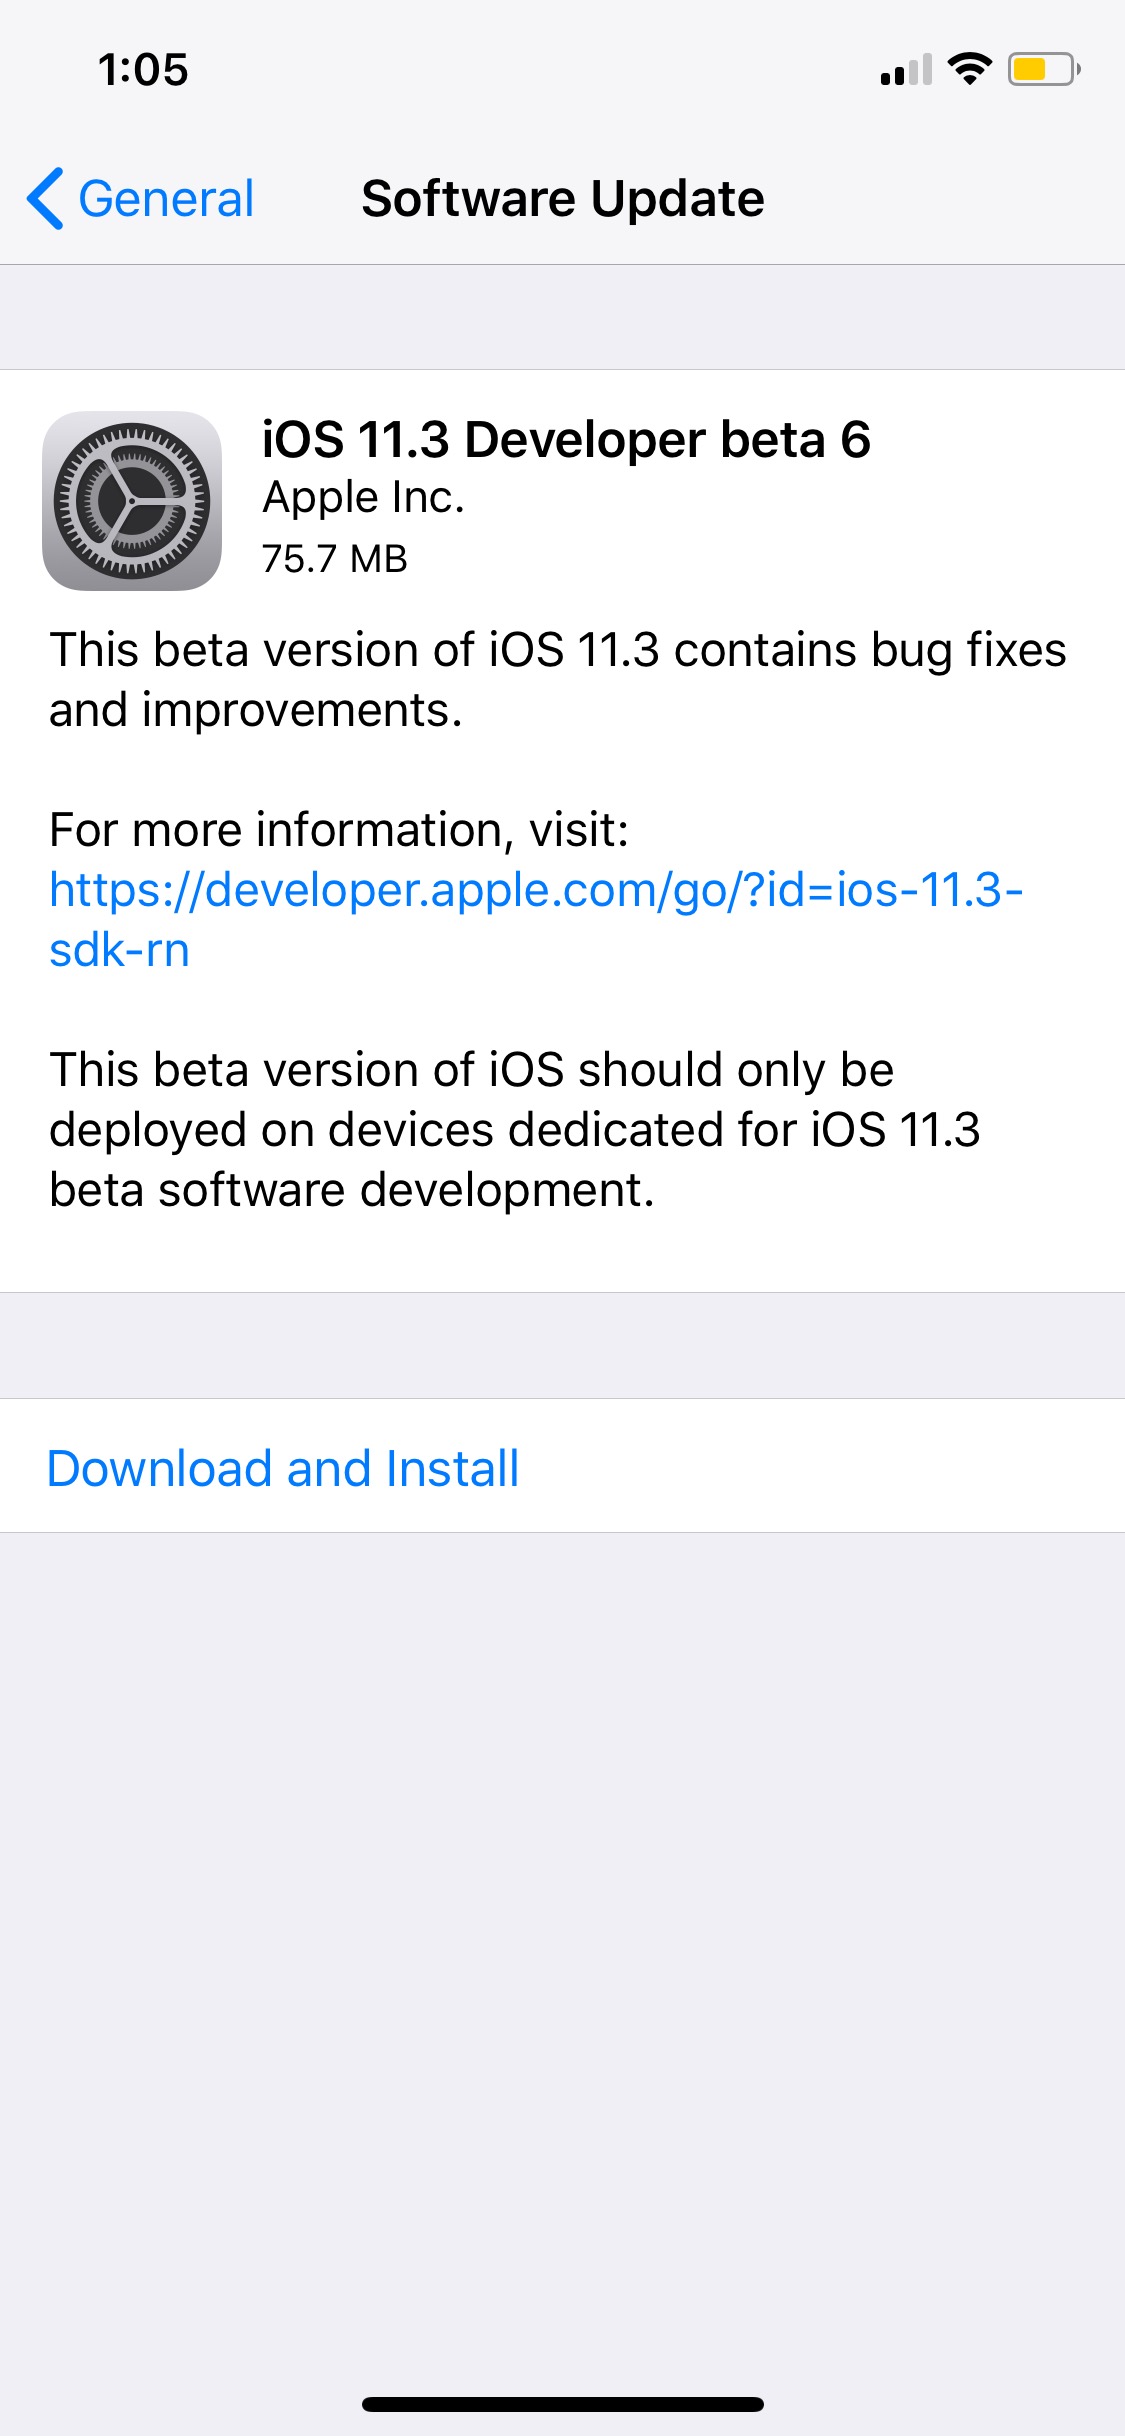 Apple Releases iOS 11.3 Beta 6 to Developers [Download]